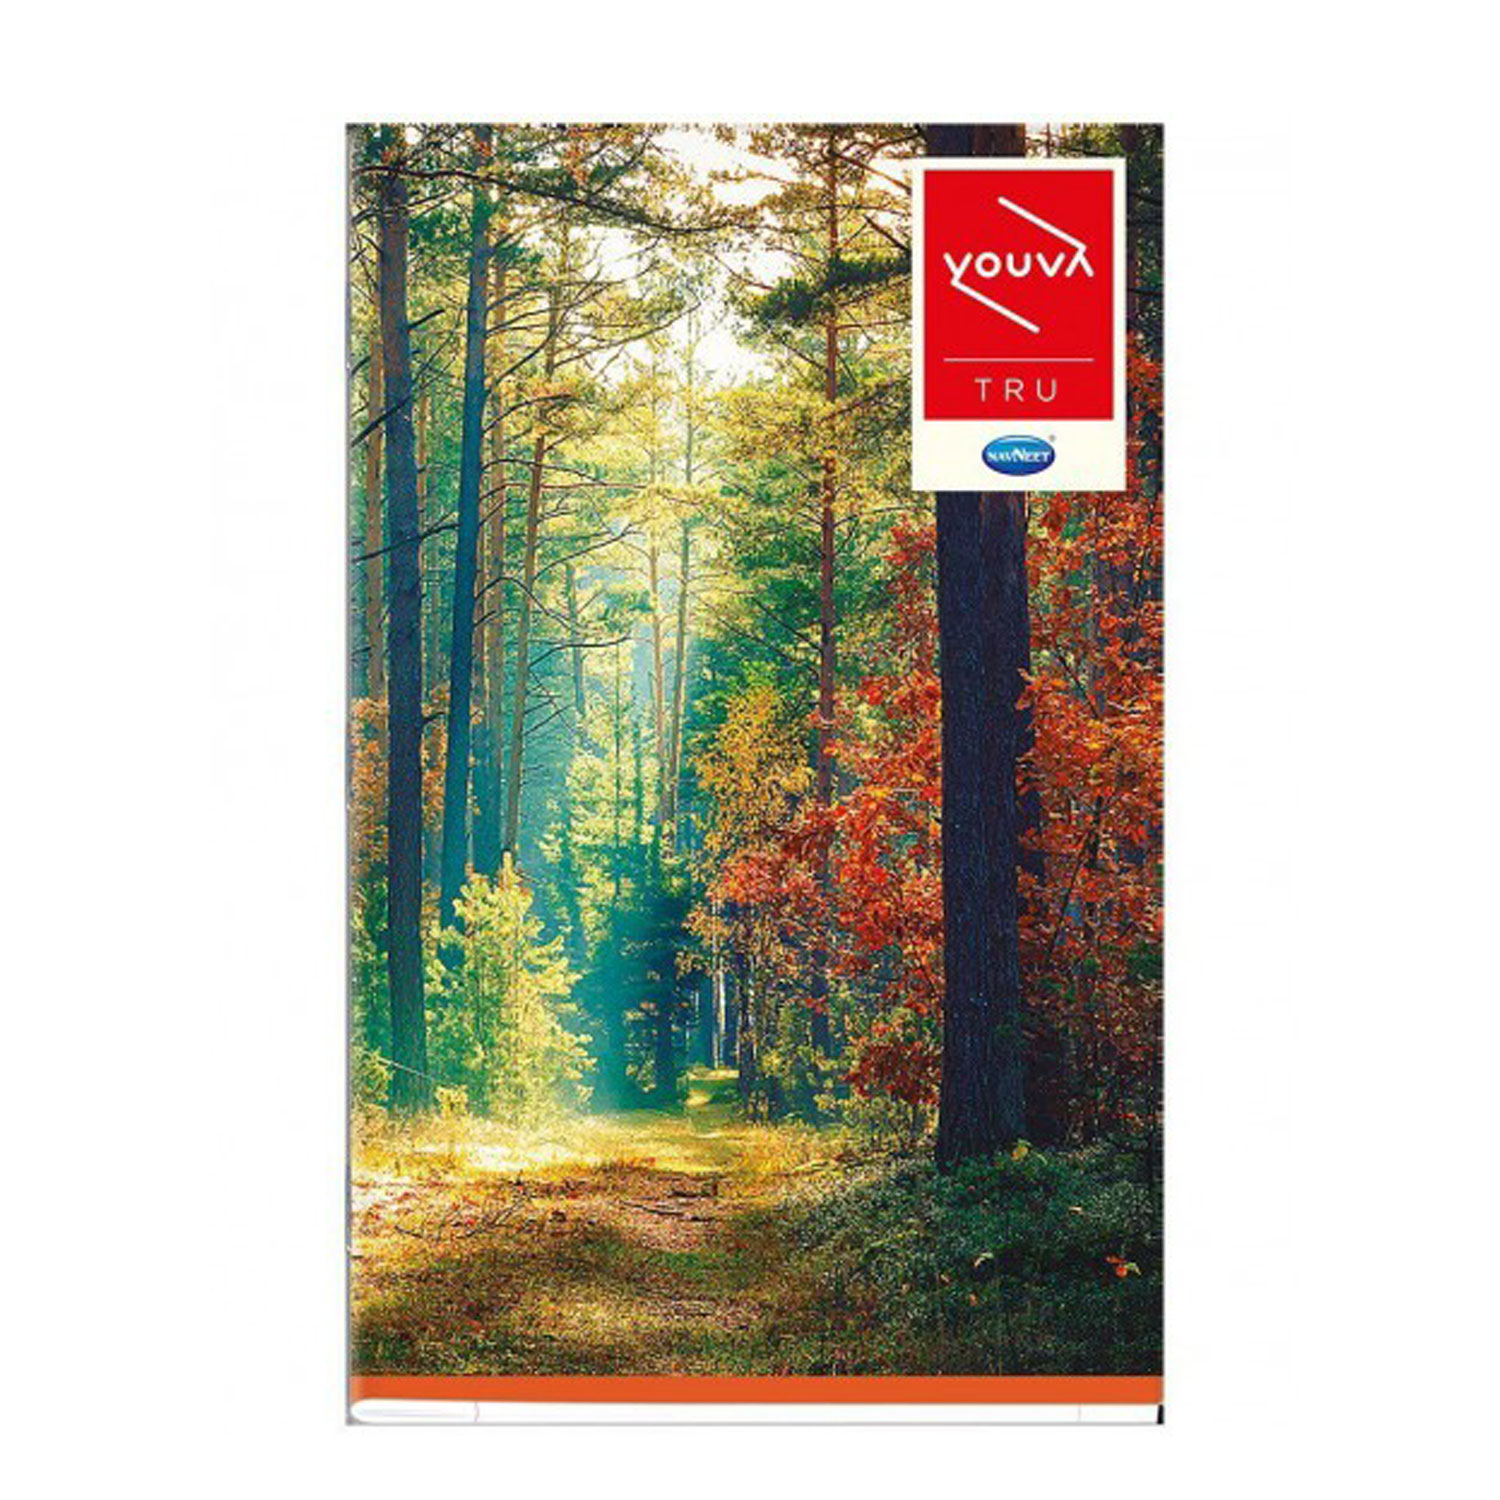 Youva Soft Bound Long Book Reqular Size| Pages 172| VT22508 | Pack of 12